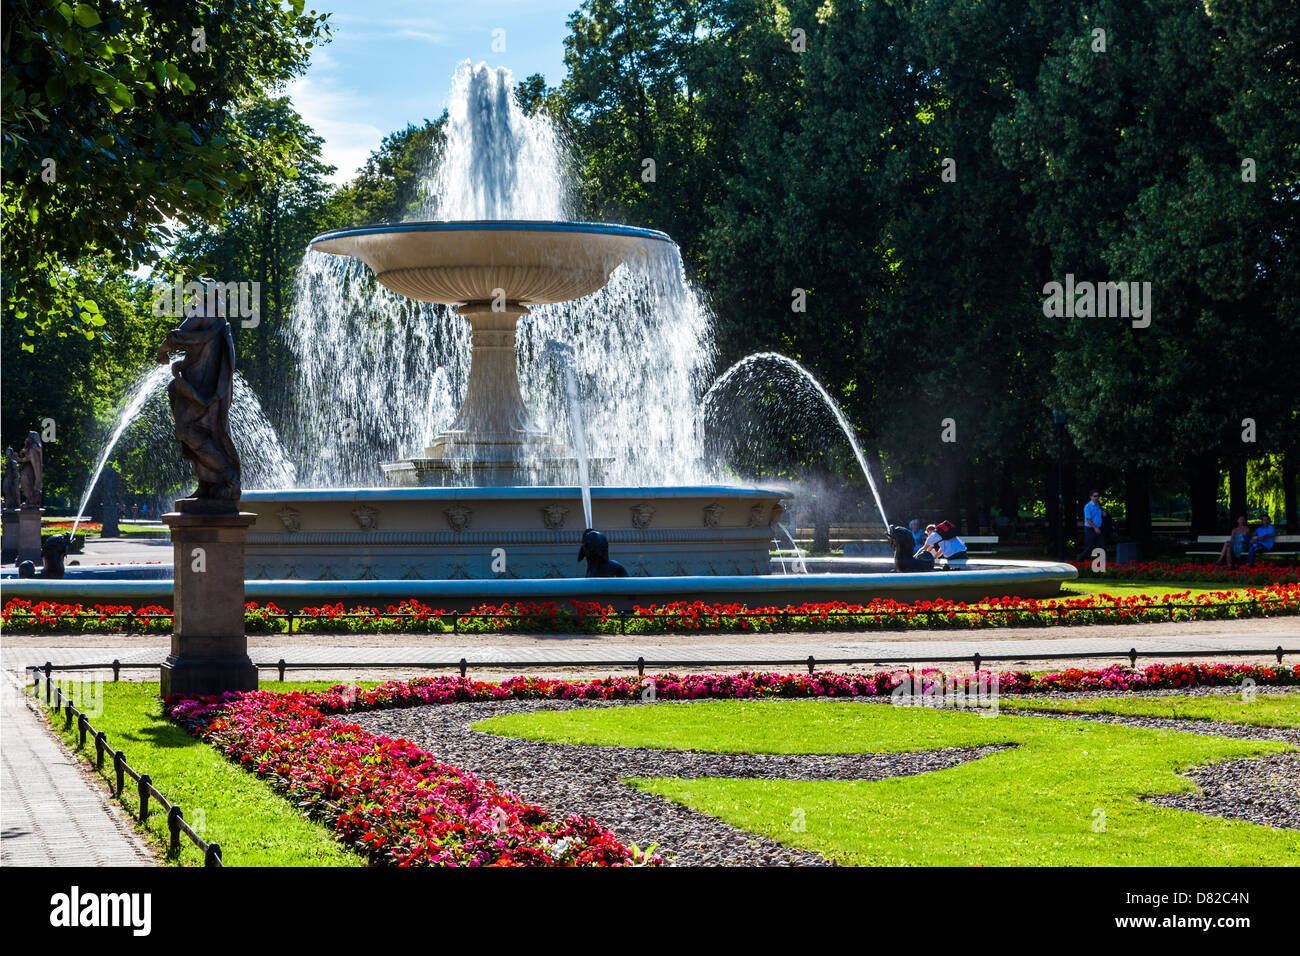 Flower beds, statues and the fountain in Ogród Saski, Saxon Garden, the oldest public park in Warsaw, Poland. Stock Photo